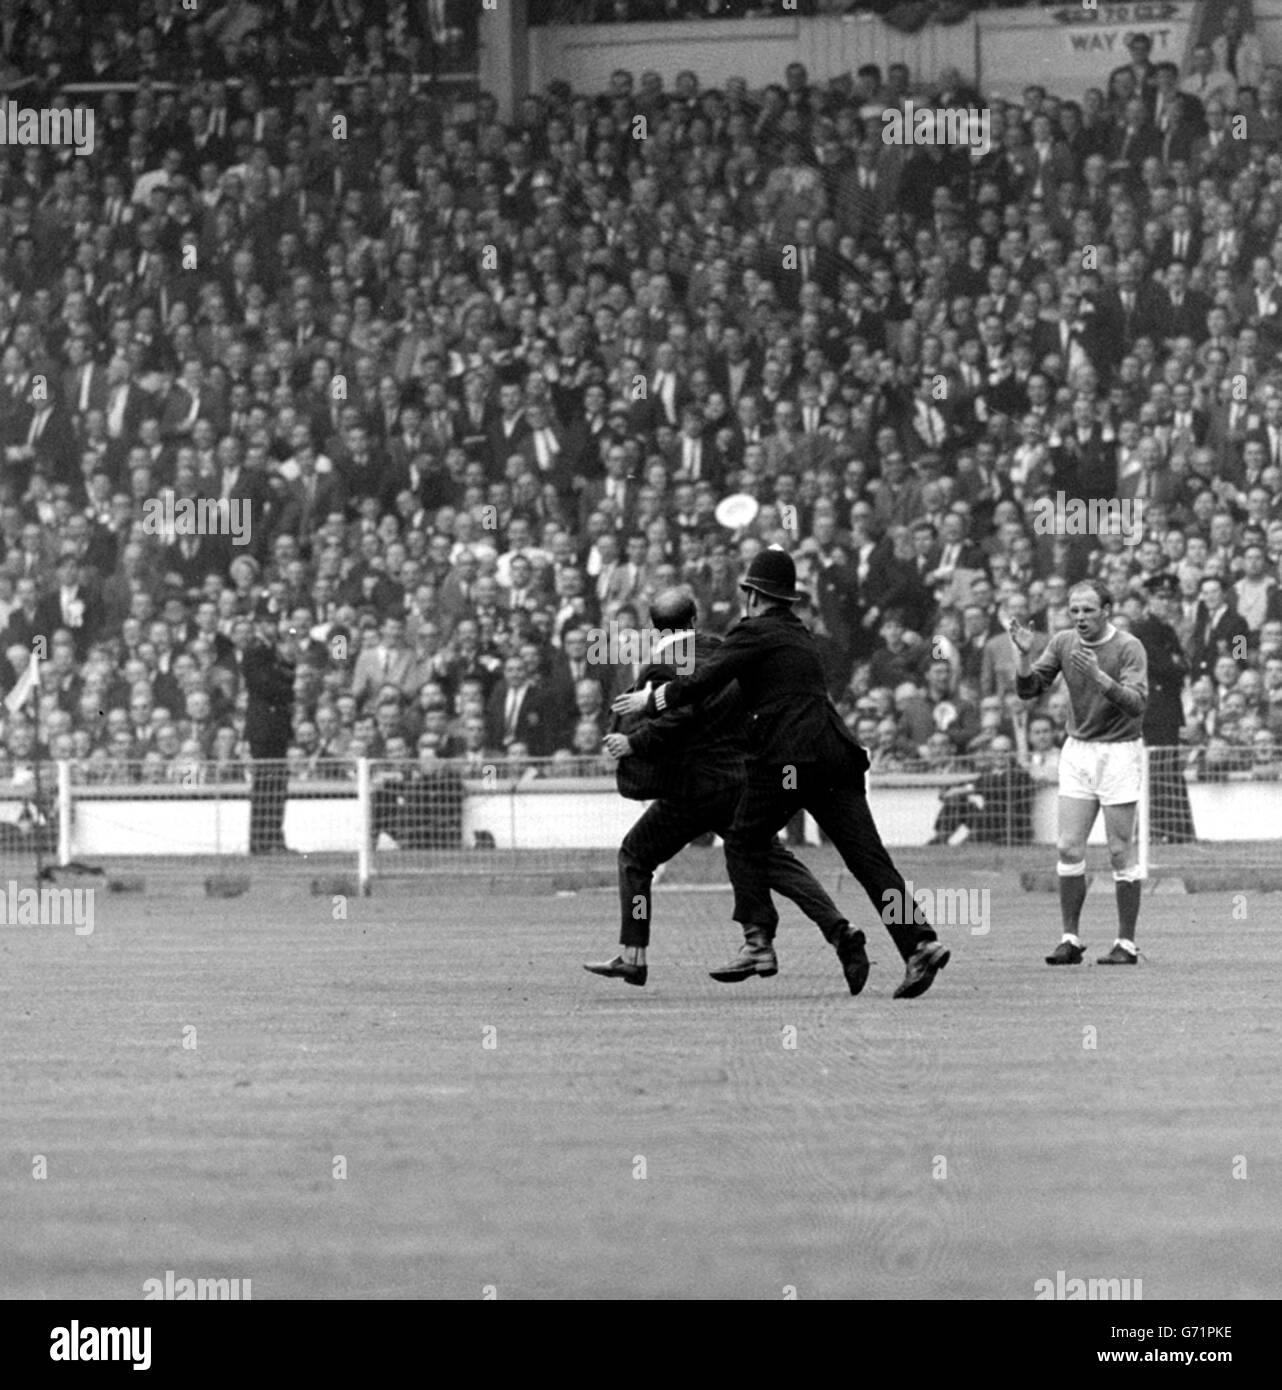 It was a moment of mad enthusiasm during the FA Cup Final at Wembley. After the Everton hero Trebilcock score dhis second goal this supporter dashed onto the field and had to be removed by police, watched by Everton's Ray Wilson, (right). Stock Photo